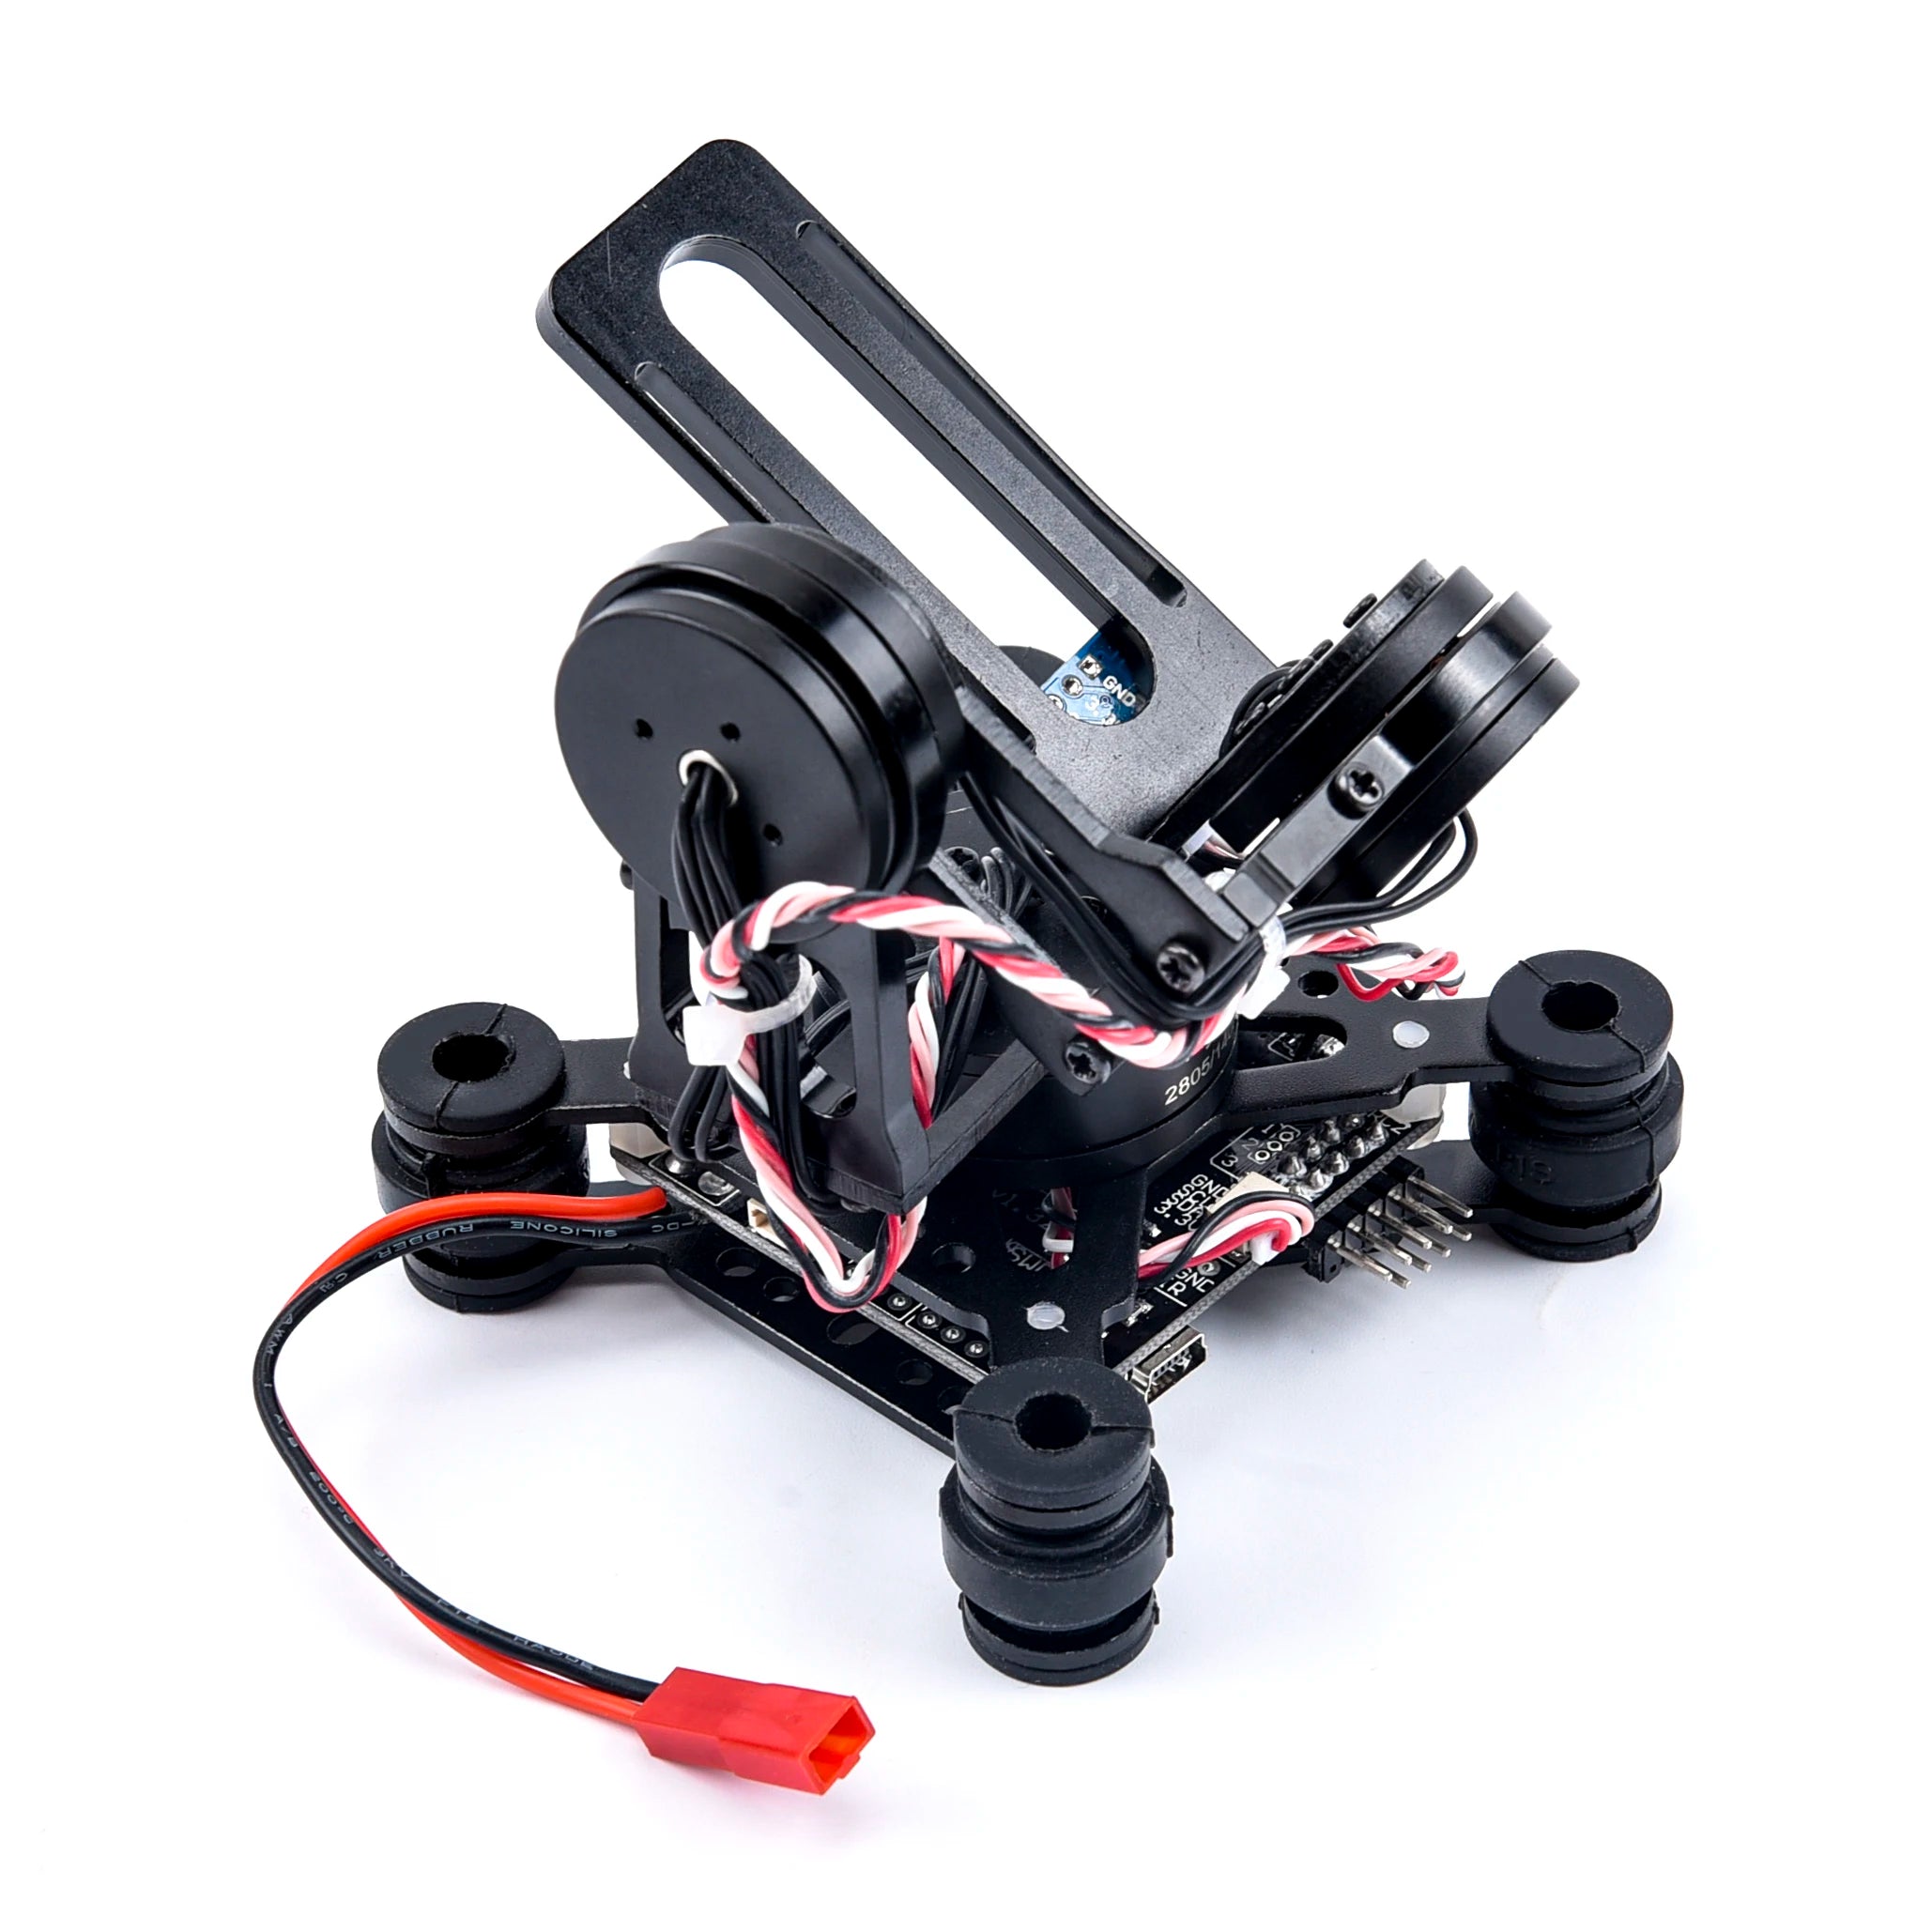 3 Axis Brushless Gimbal, if you do this many times, it will cause damage to the flight controller 